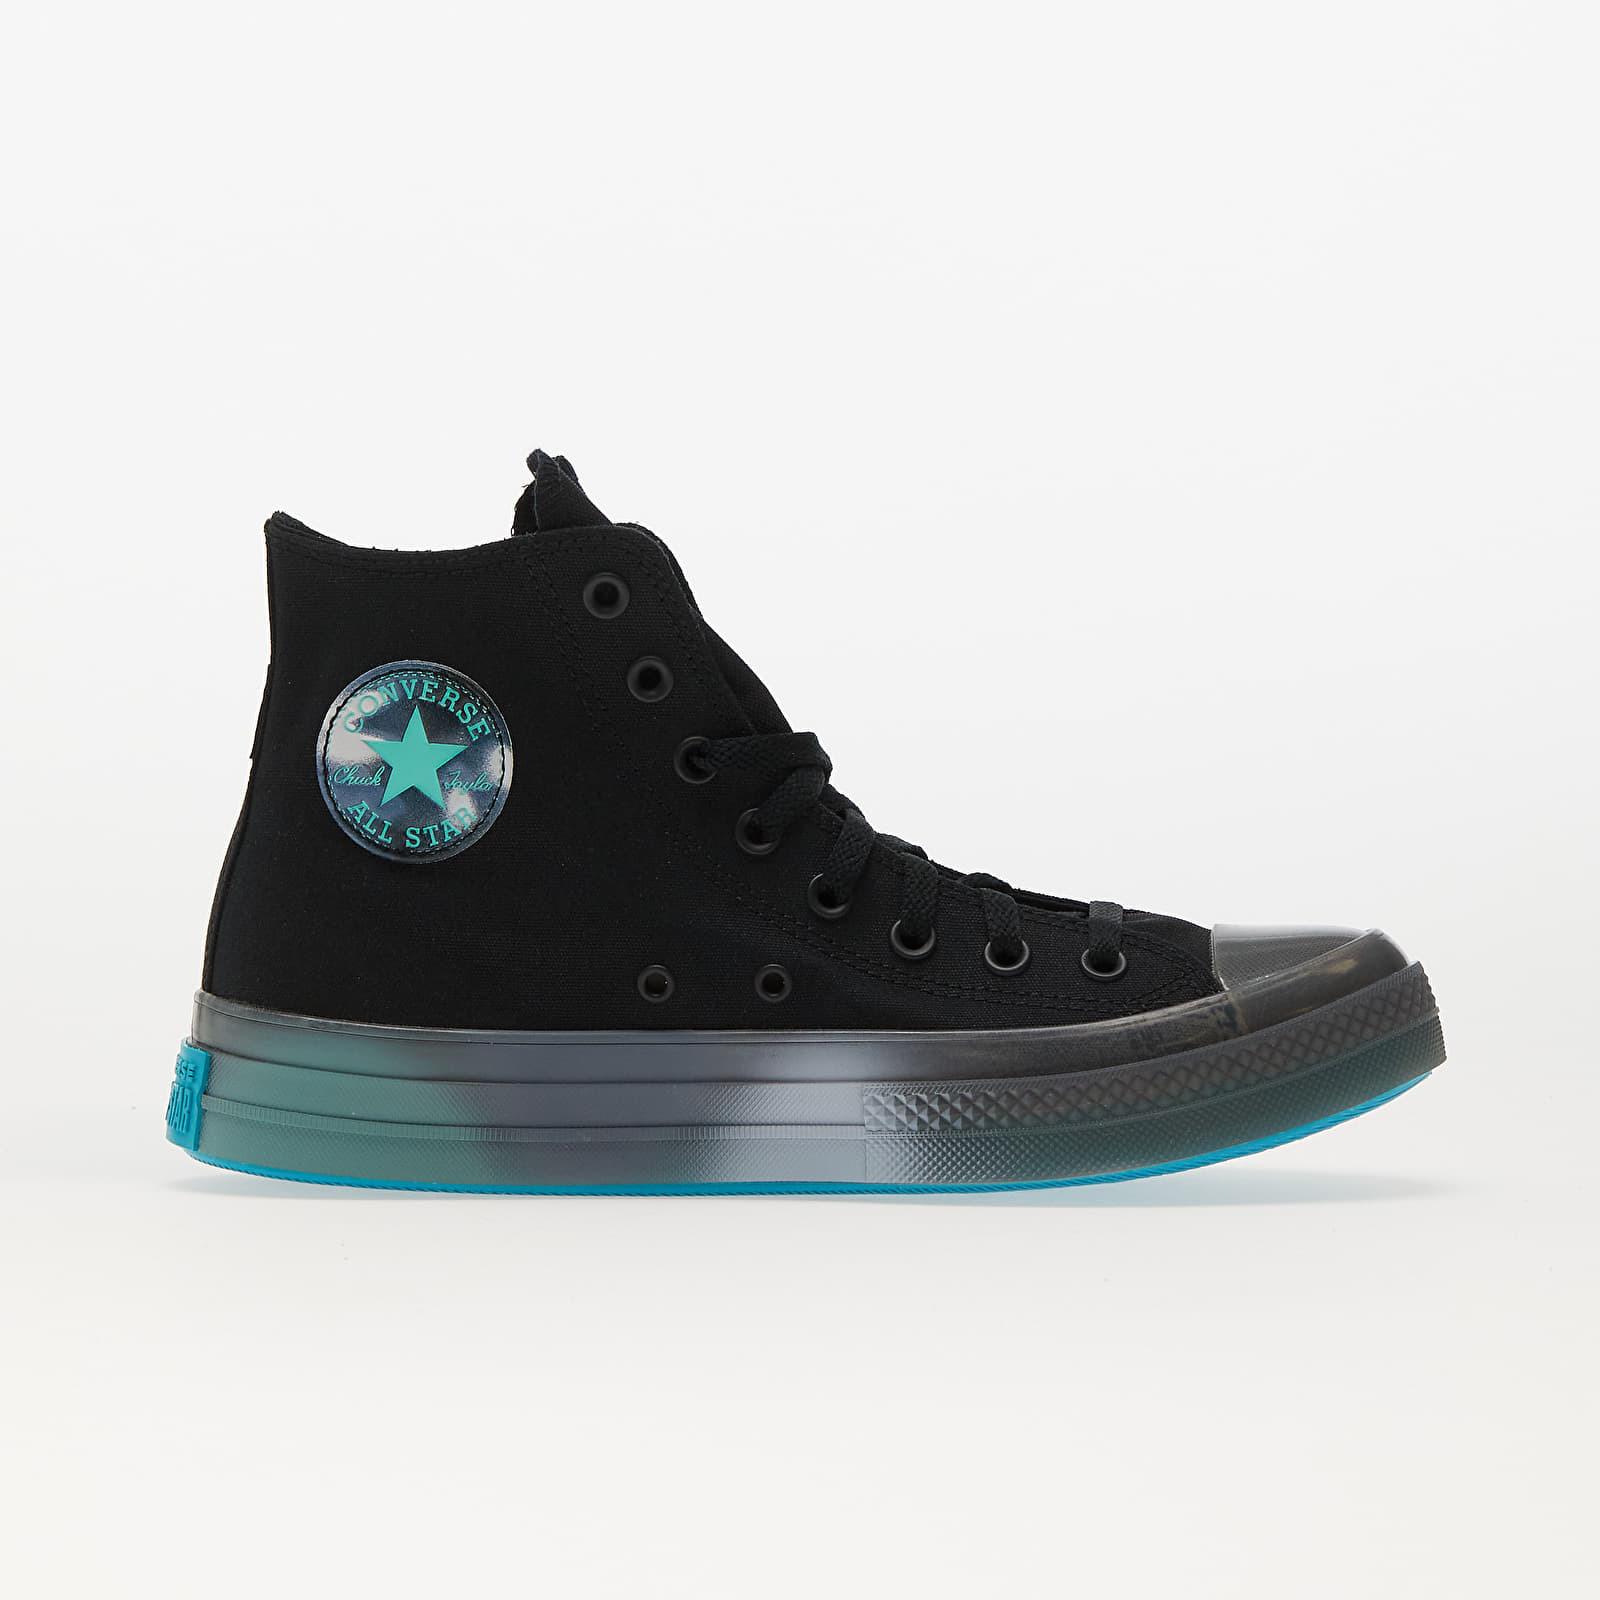 Men's shoes Converse Chuck Taylor All Star Cx Spray Paint Black/ Cyber  Teal/ Ghosted